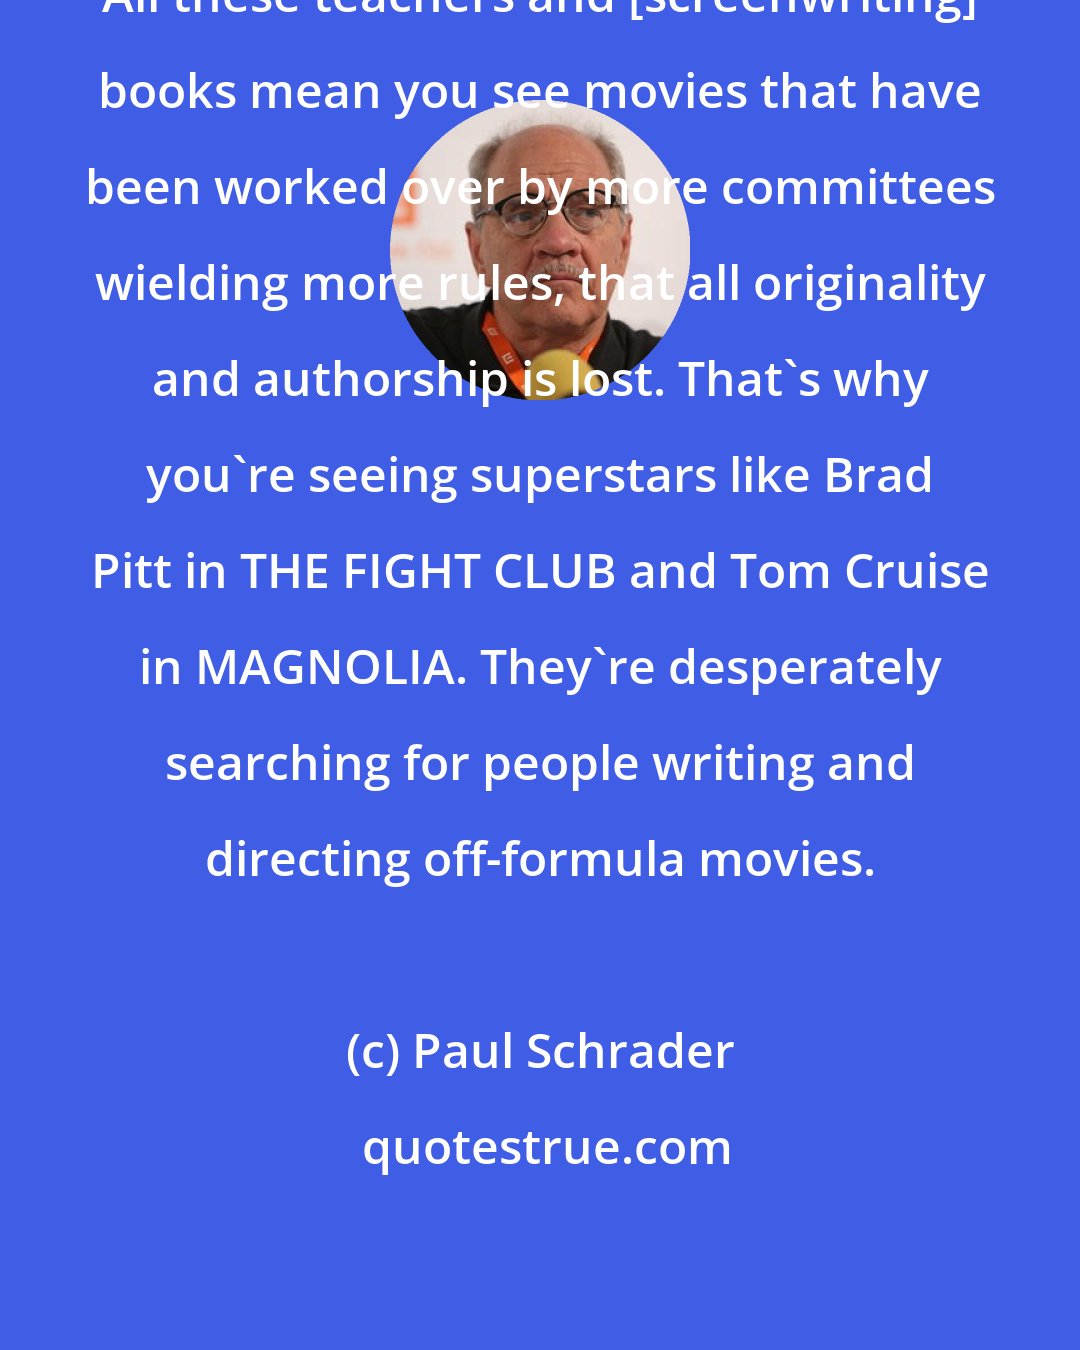 Paul Schrader: All these teachers and [screenwriting] books mean you see movies that have been worked over by more committees wielding more rules, that all originality and authorship is lost. That's why you're seeing superstars like Brad Pitt in THE FIGHT CLUB and Tom Cruise in MAGNOLIA. They're desperately searching for people writing and directing off-formula movies.